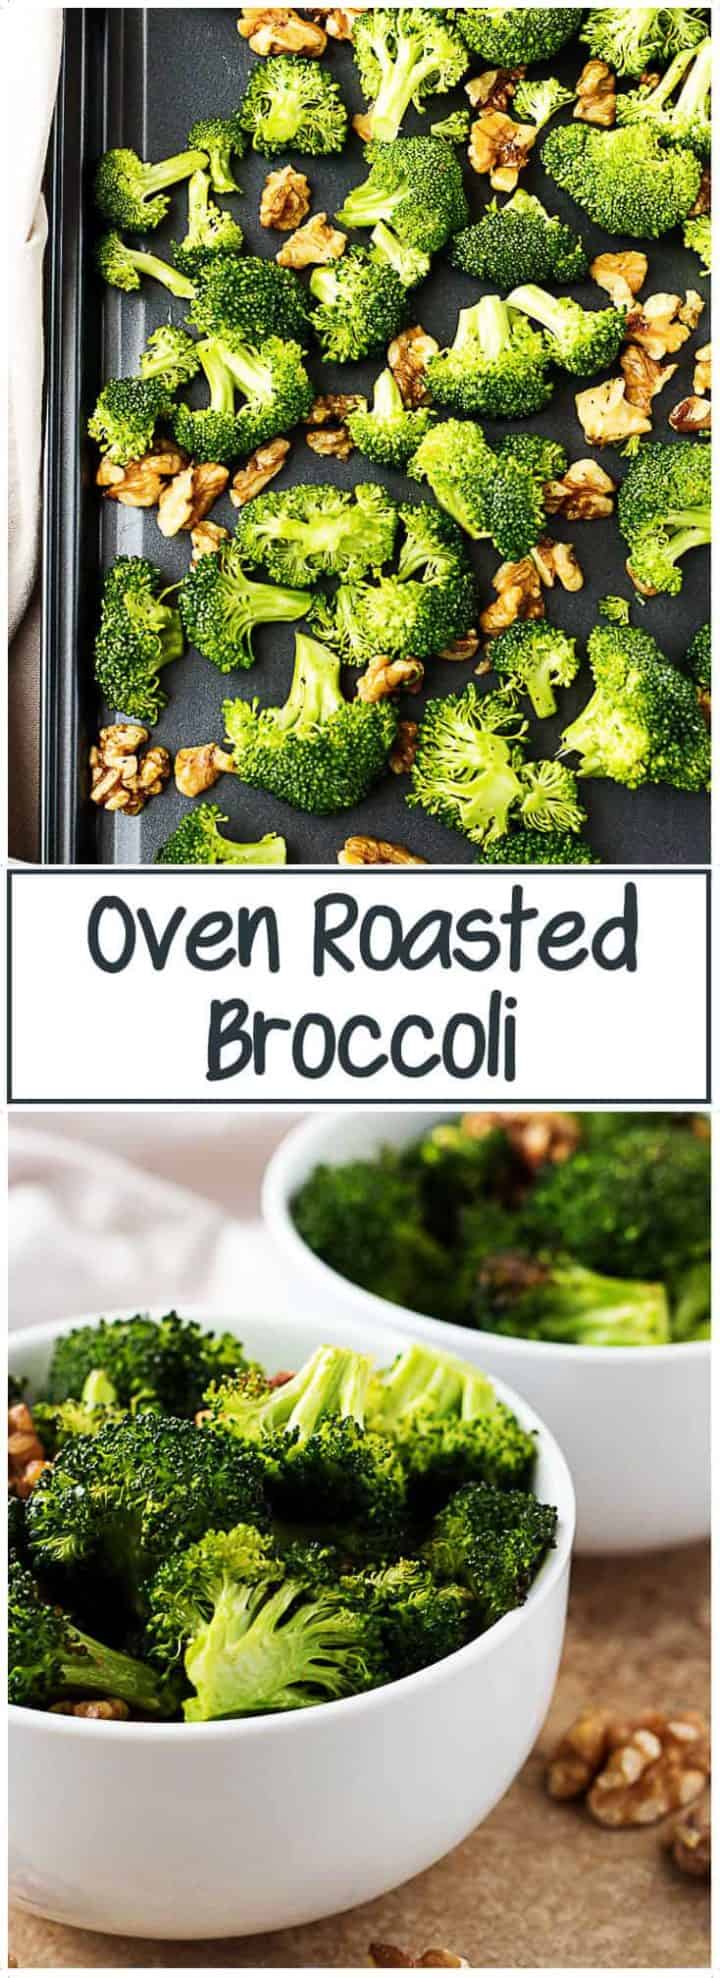 Two pictures of the oven roasted broccoli, one on a sheet, the other in serving bowls.